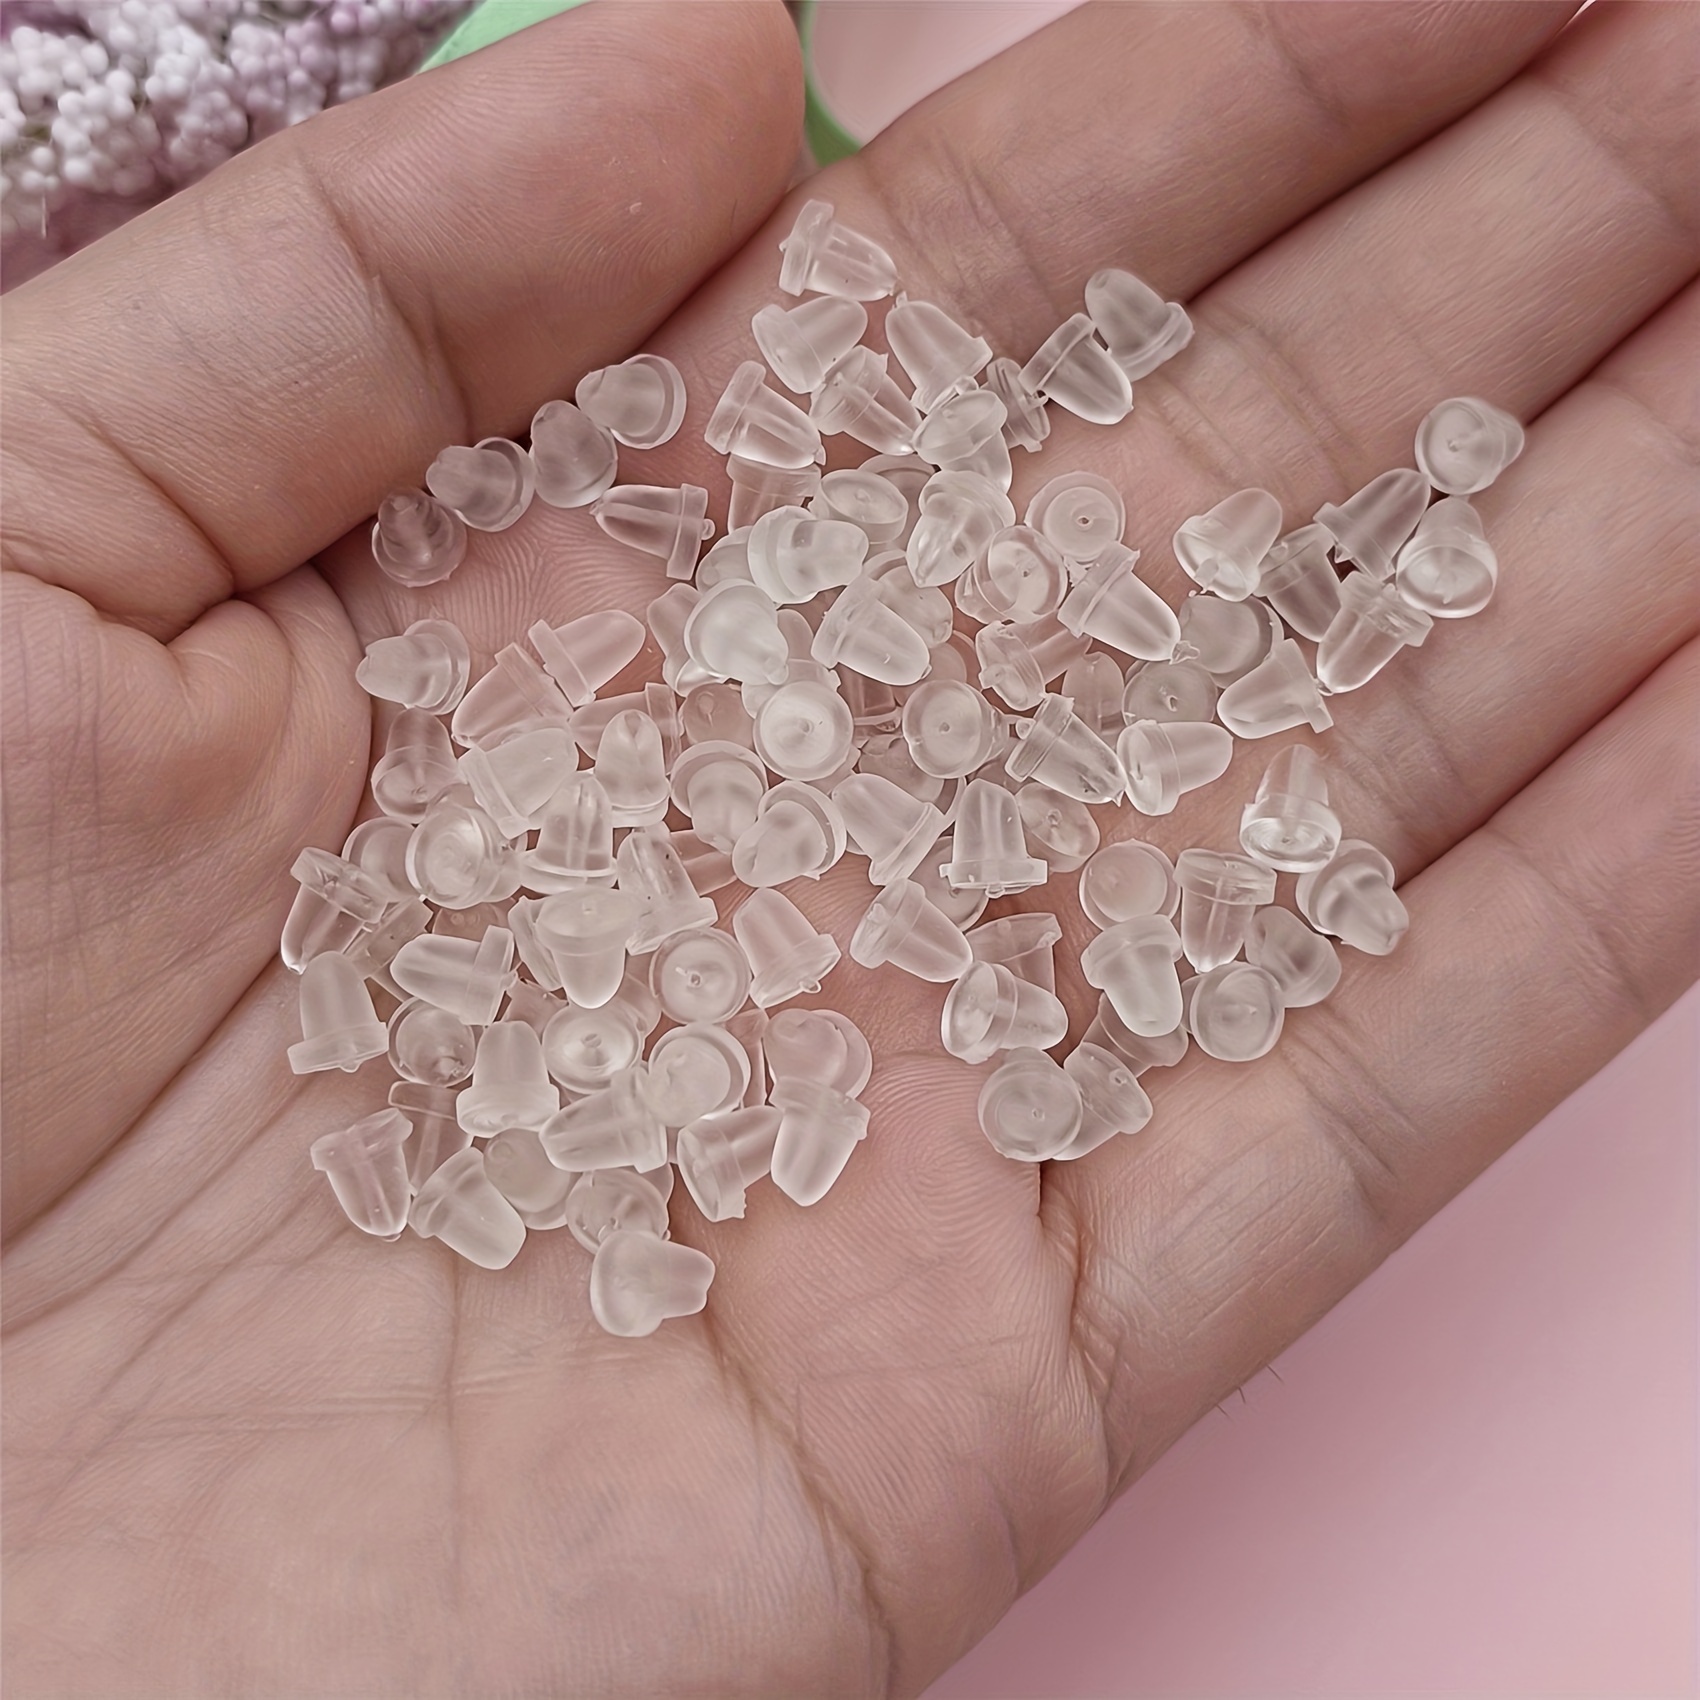 100pcs Silicone Earring Backs Clear Soft Rubber Ear Stud Blocked